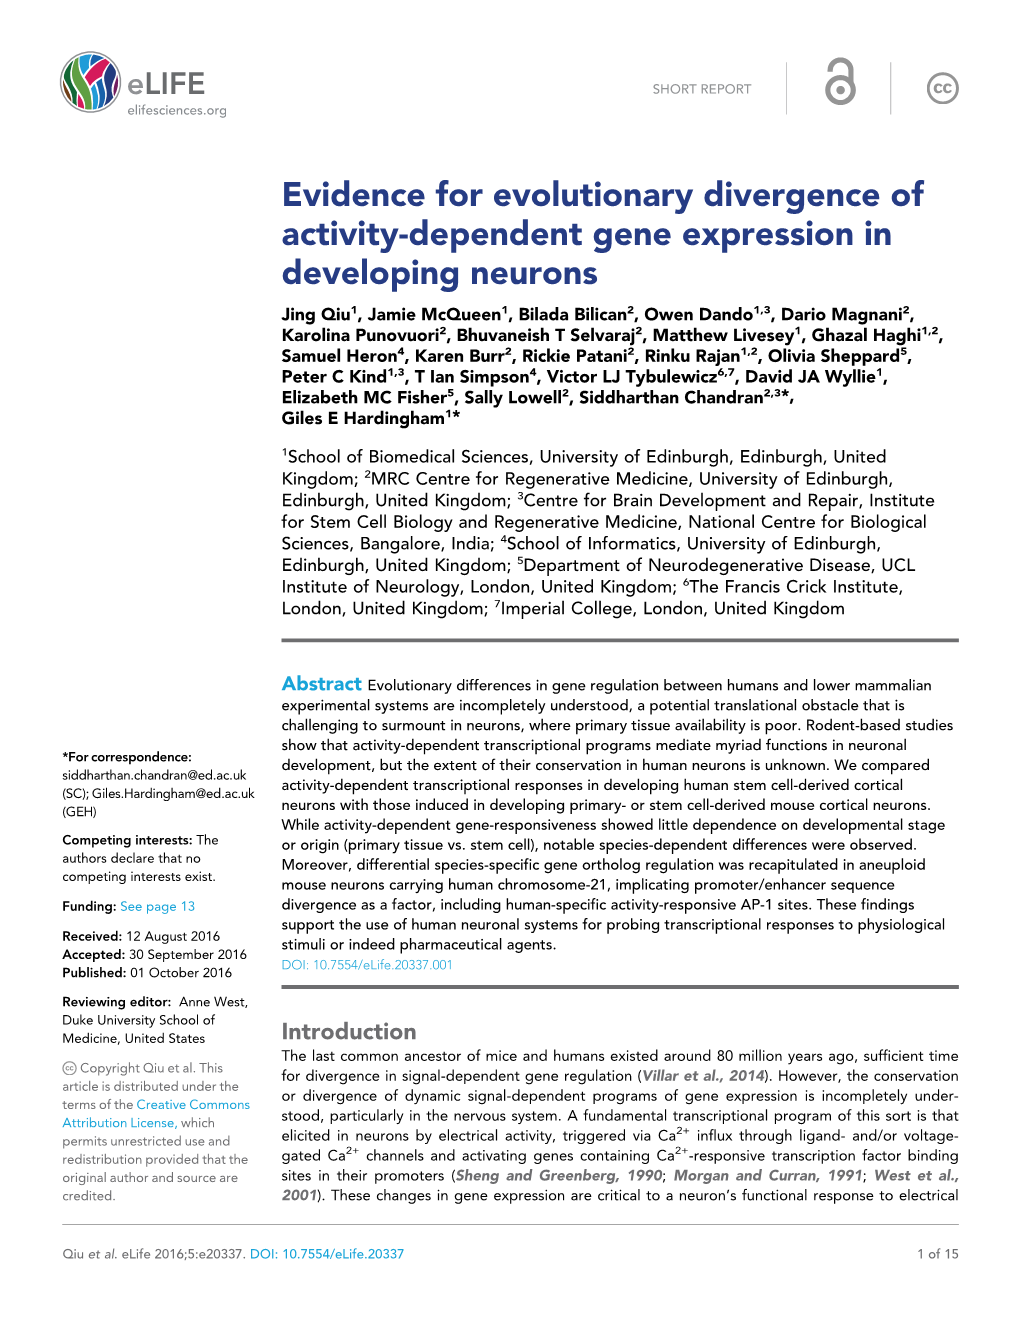 Evidence for Evolutionary Divergence of Activity